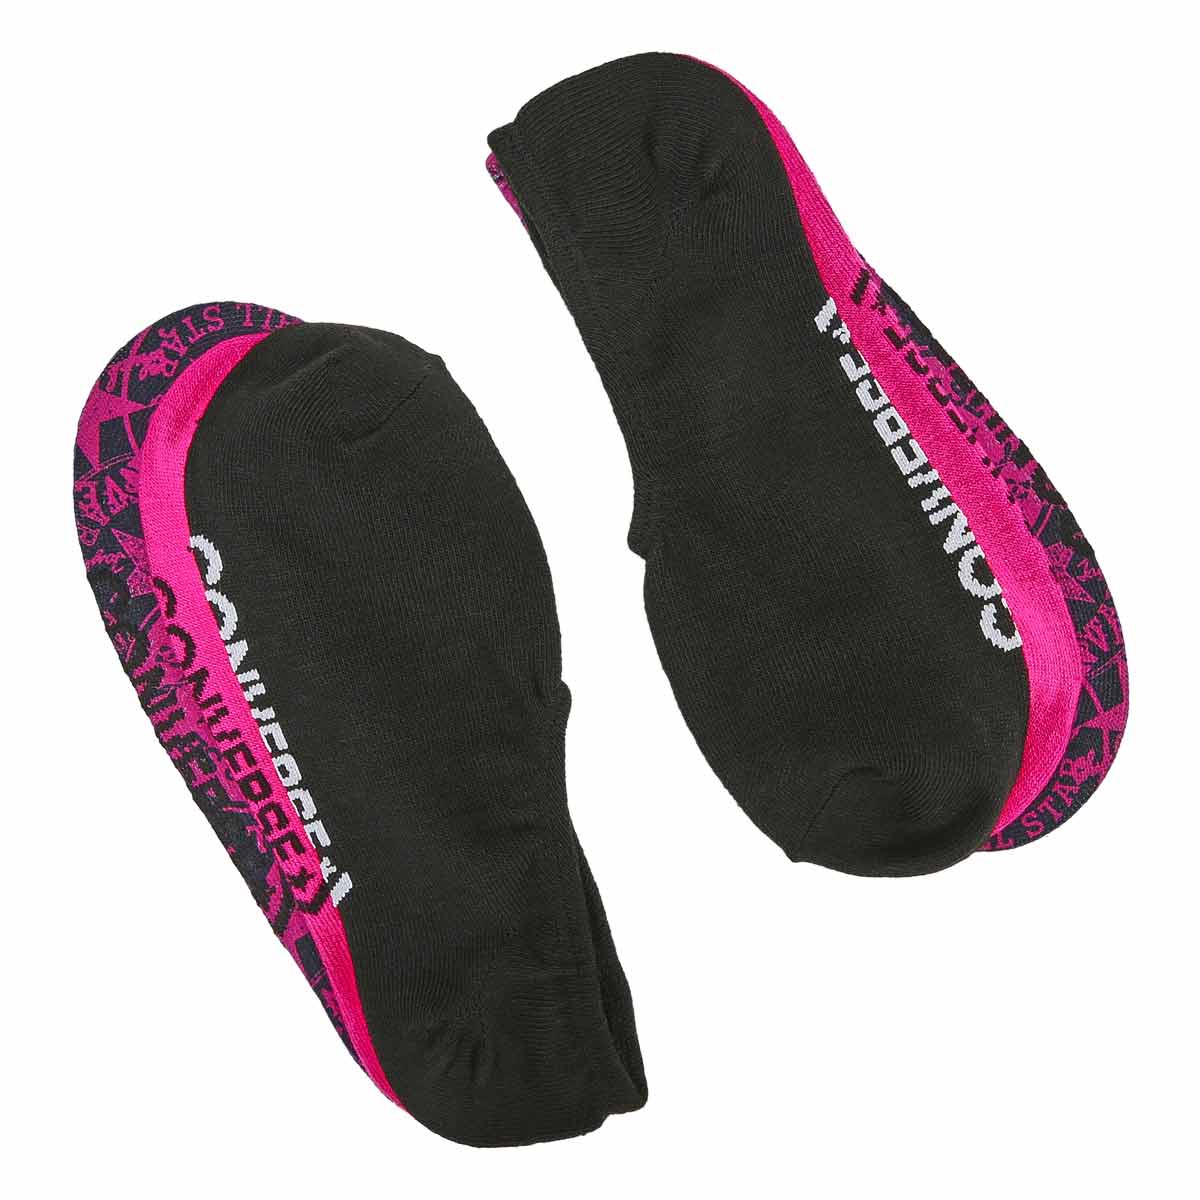 Socquettes invisibles MFC OX, femmes - 3 paires